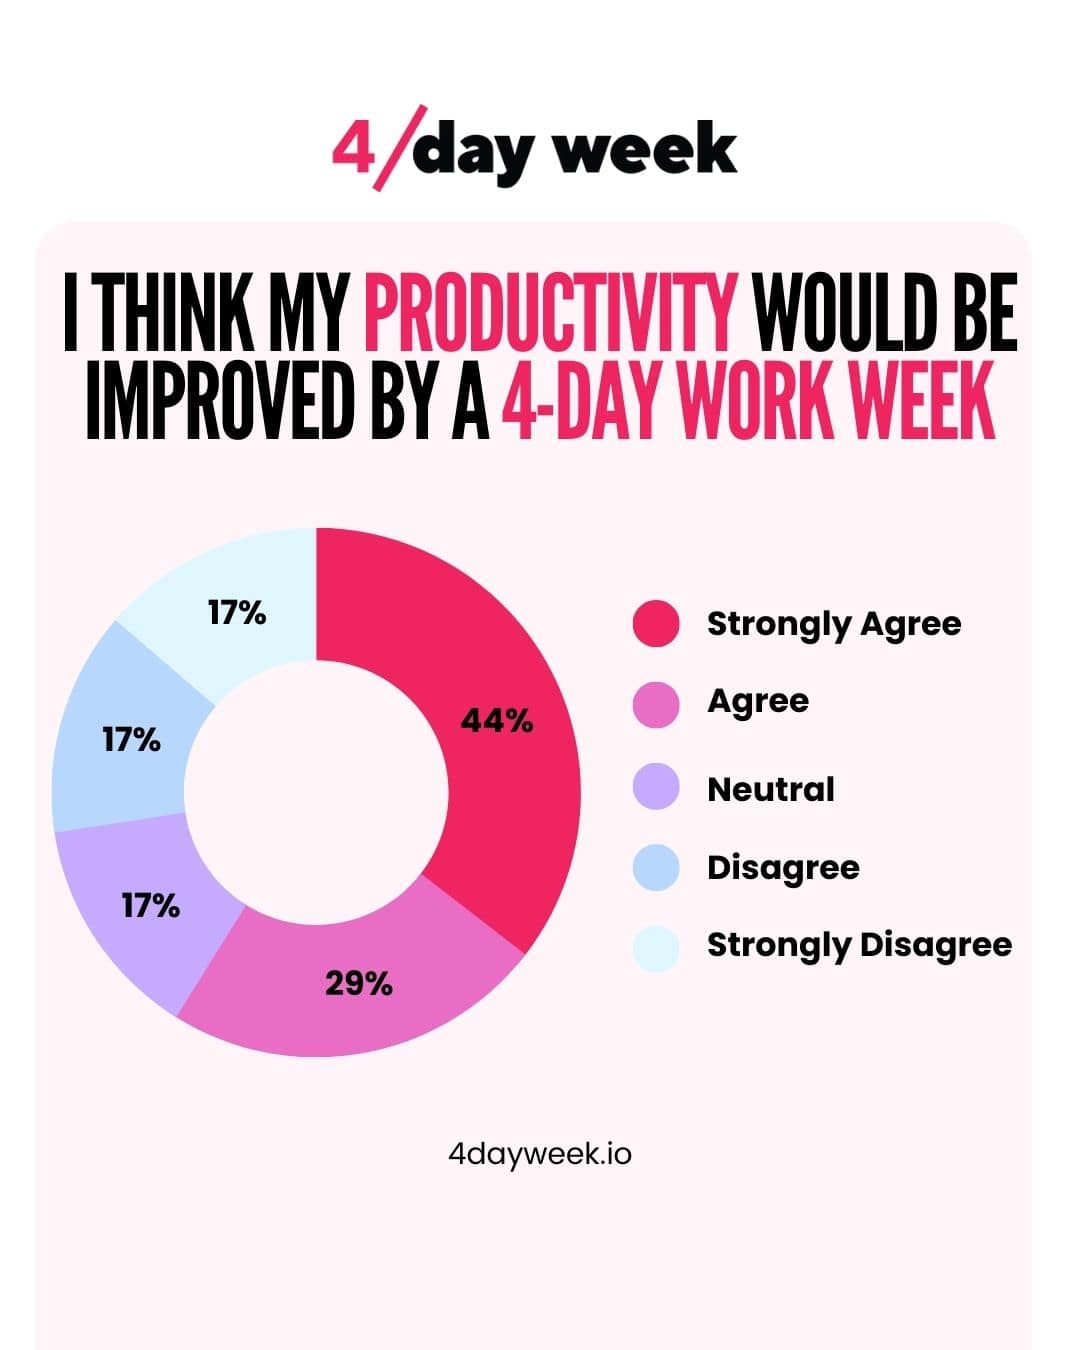 Employee Productivity and the 4-Day Workweek